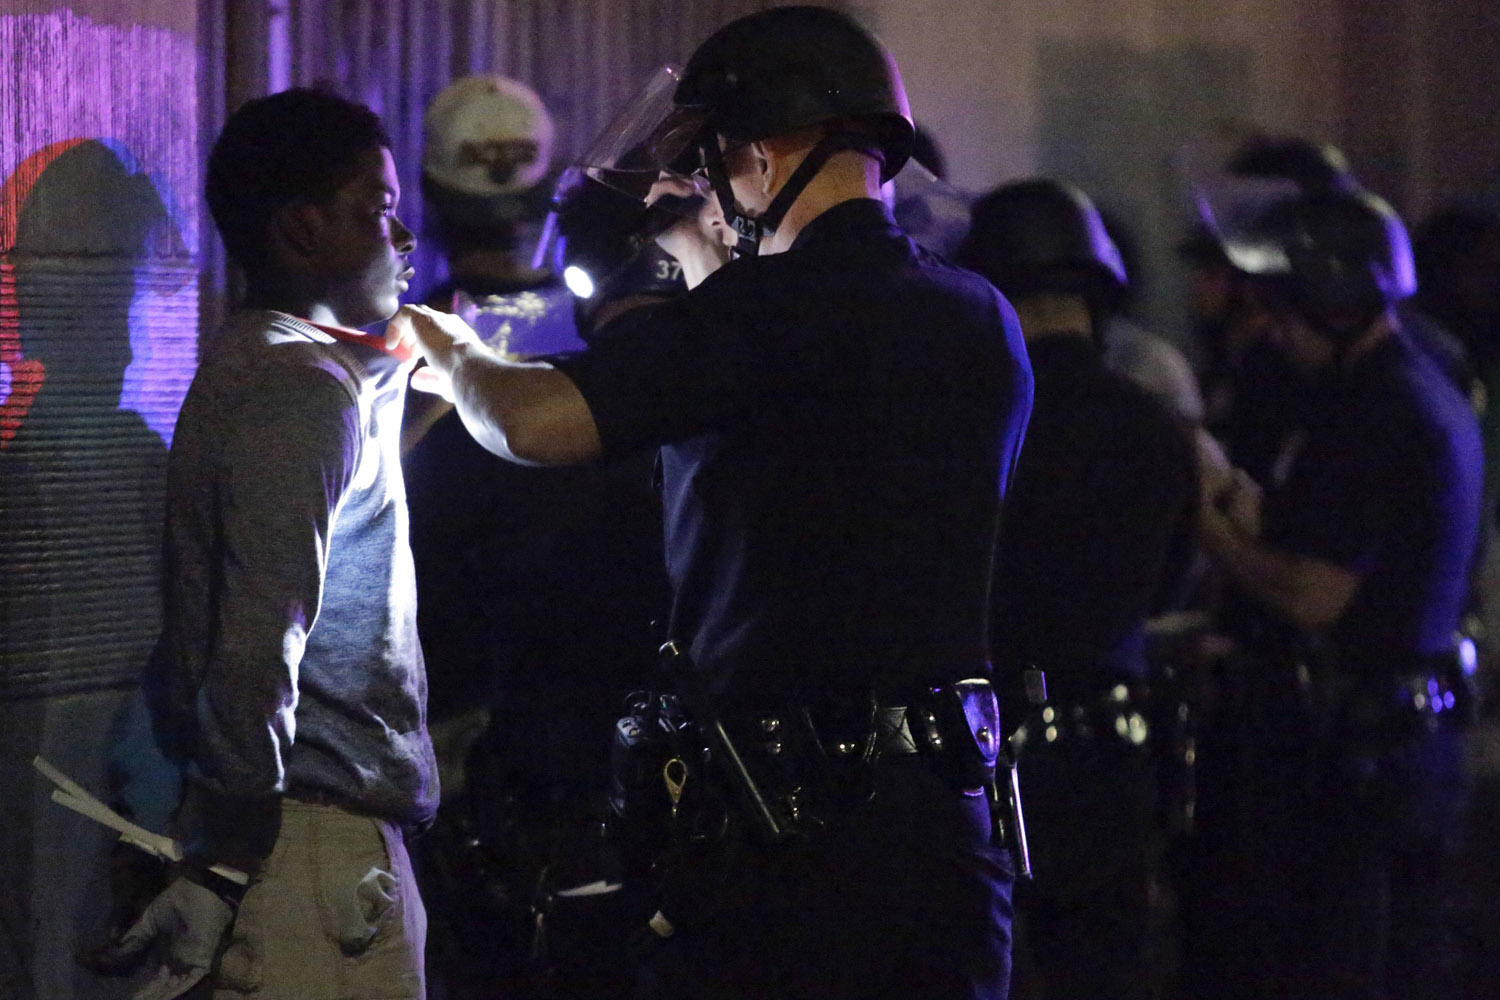 Los Angeles police arrest about a dozen people after a peaceful protest supporting Trayvon Martin turned unlawful in the Leimert Park neighborhood Los Angeles, California